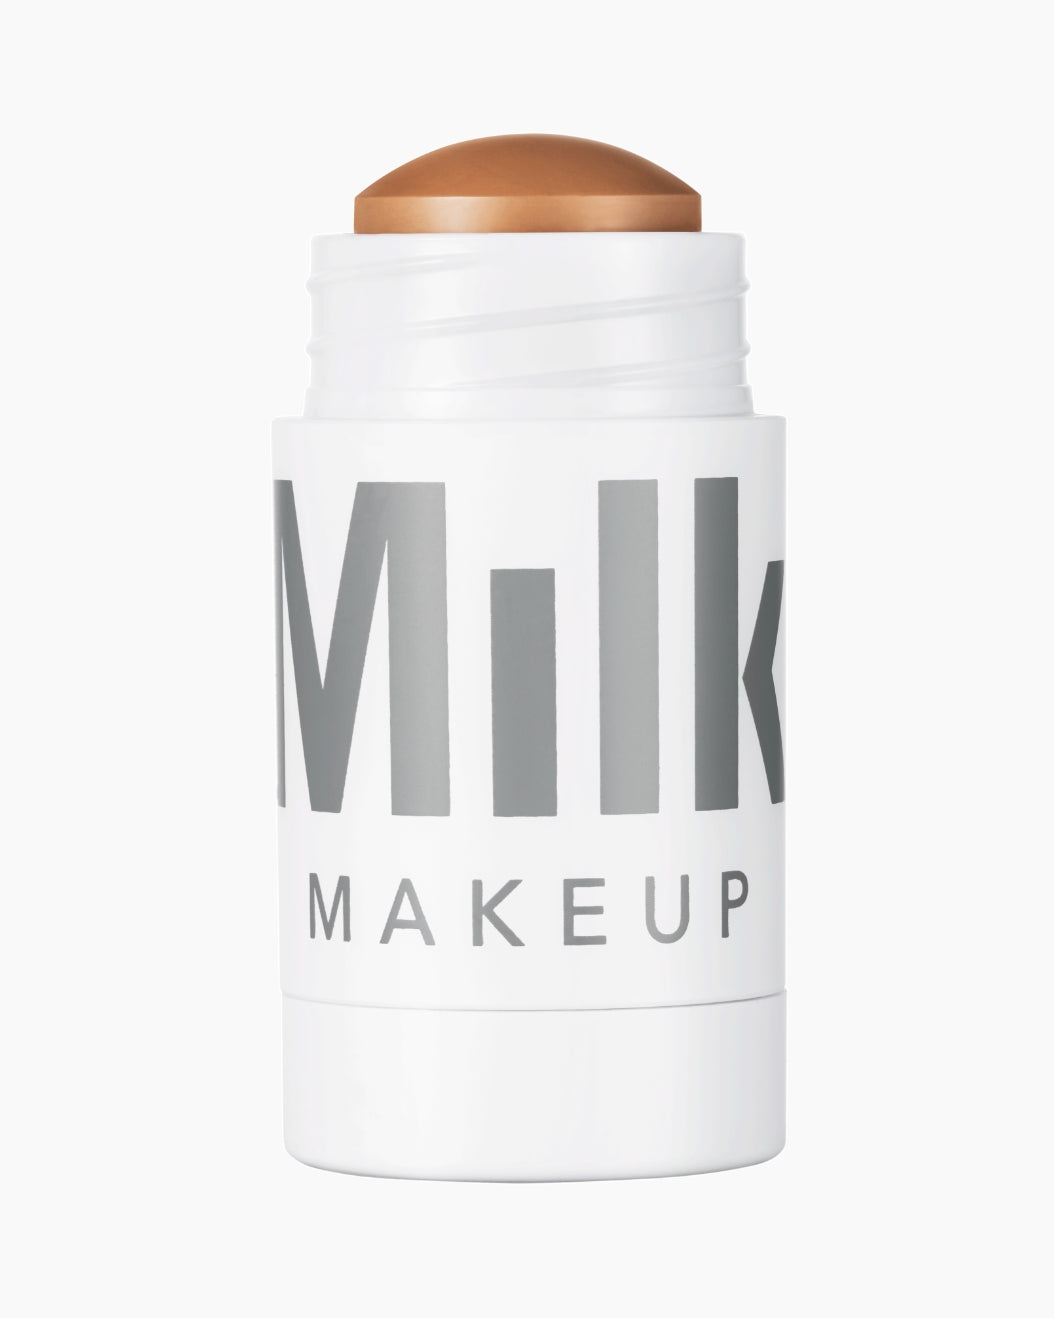 Tube of Milk Makeup Matte Bronzer against a white background